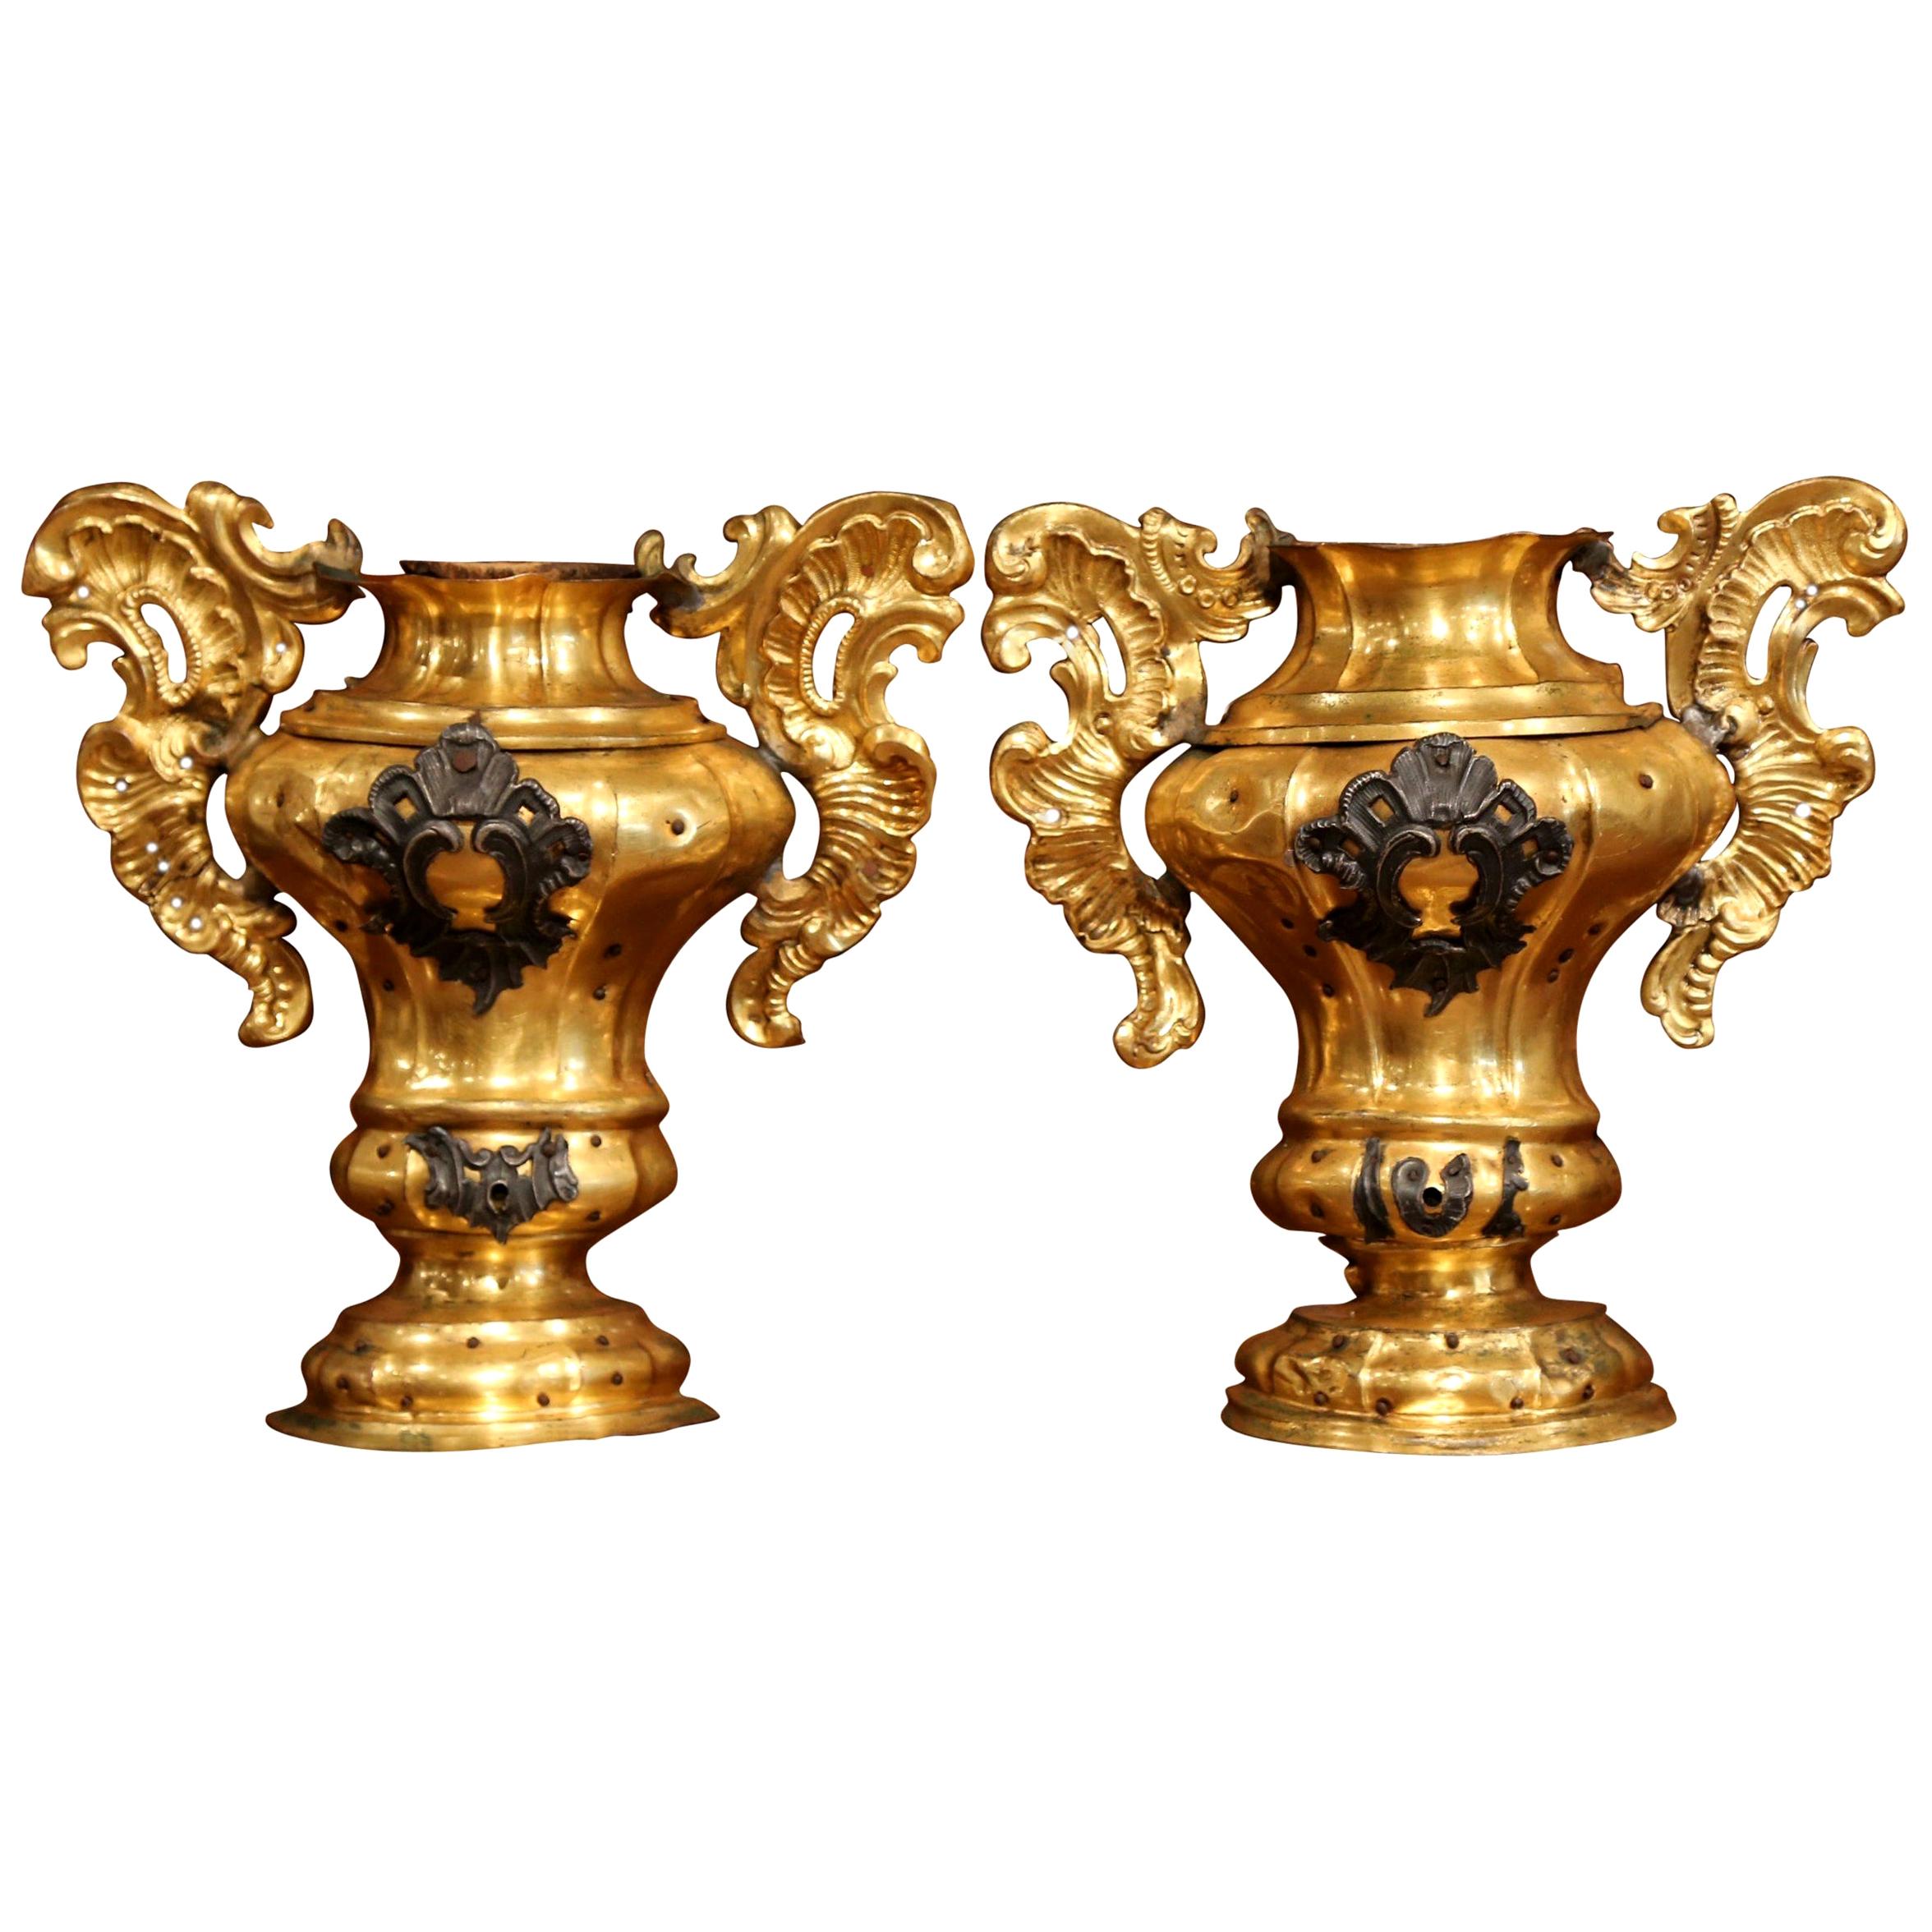 Pair of 18th Century Italian Carved Giltwood and Brass Altar Ornament Vessels